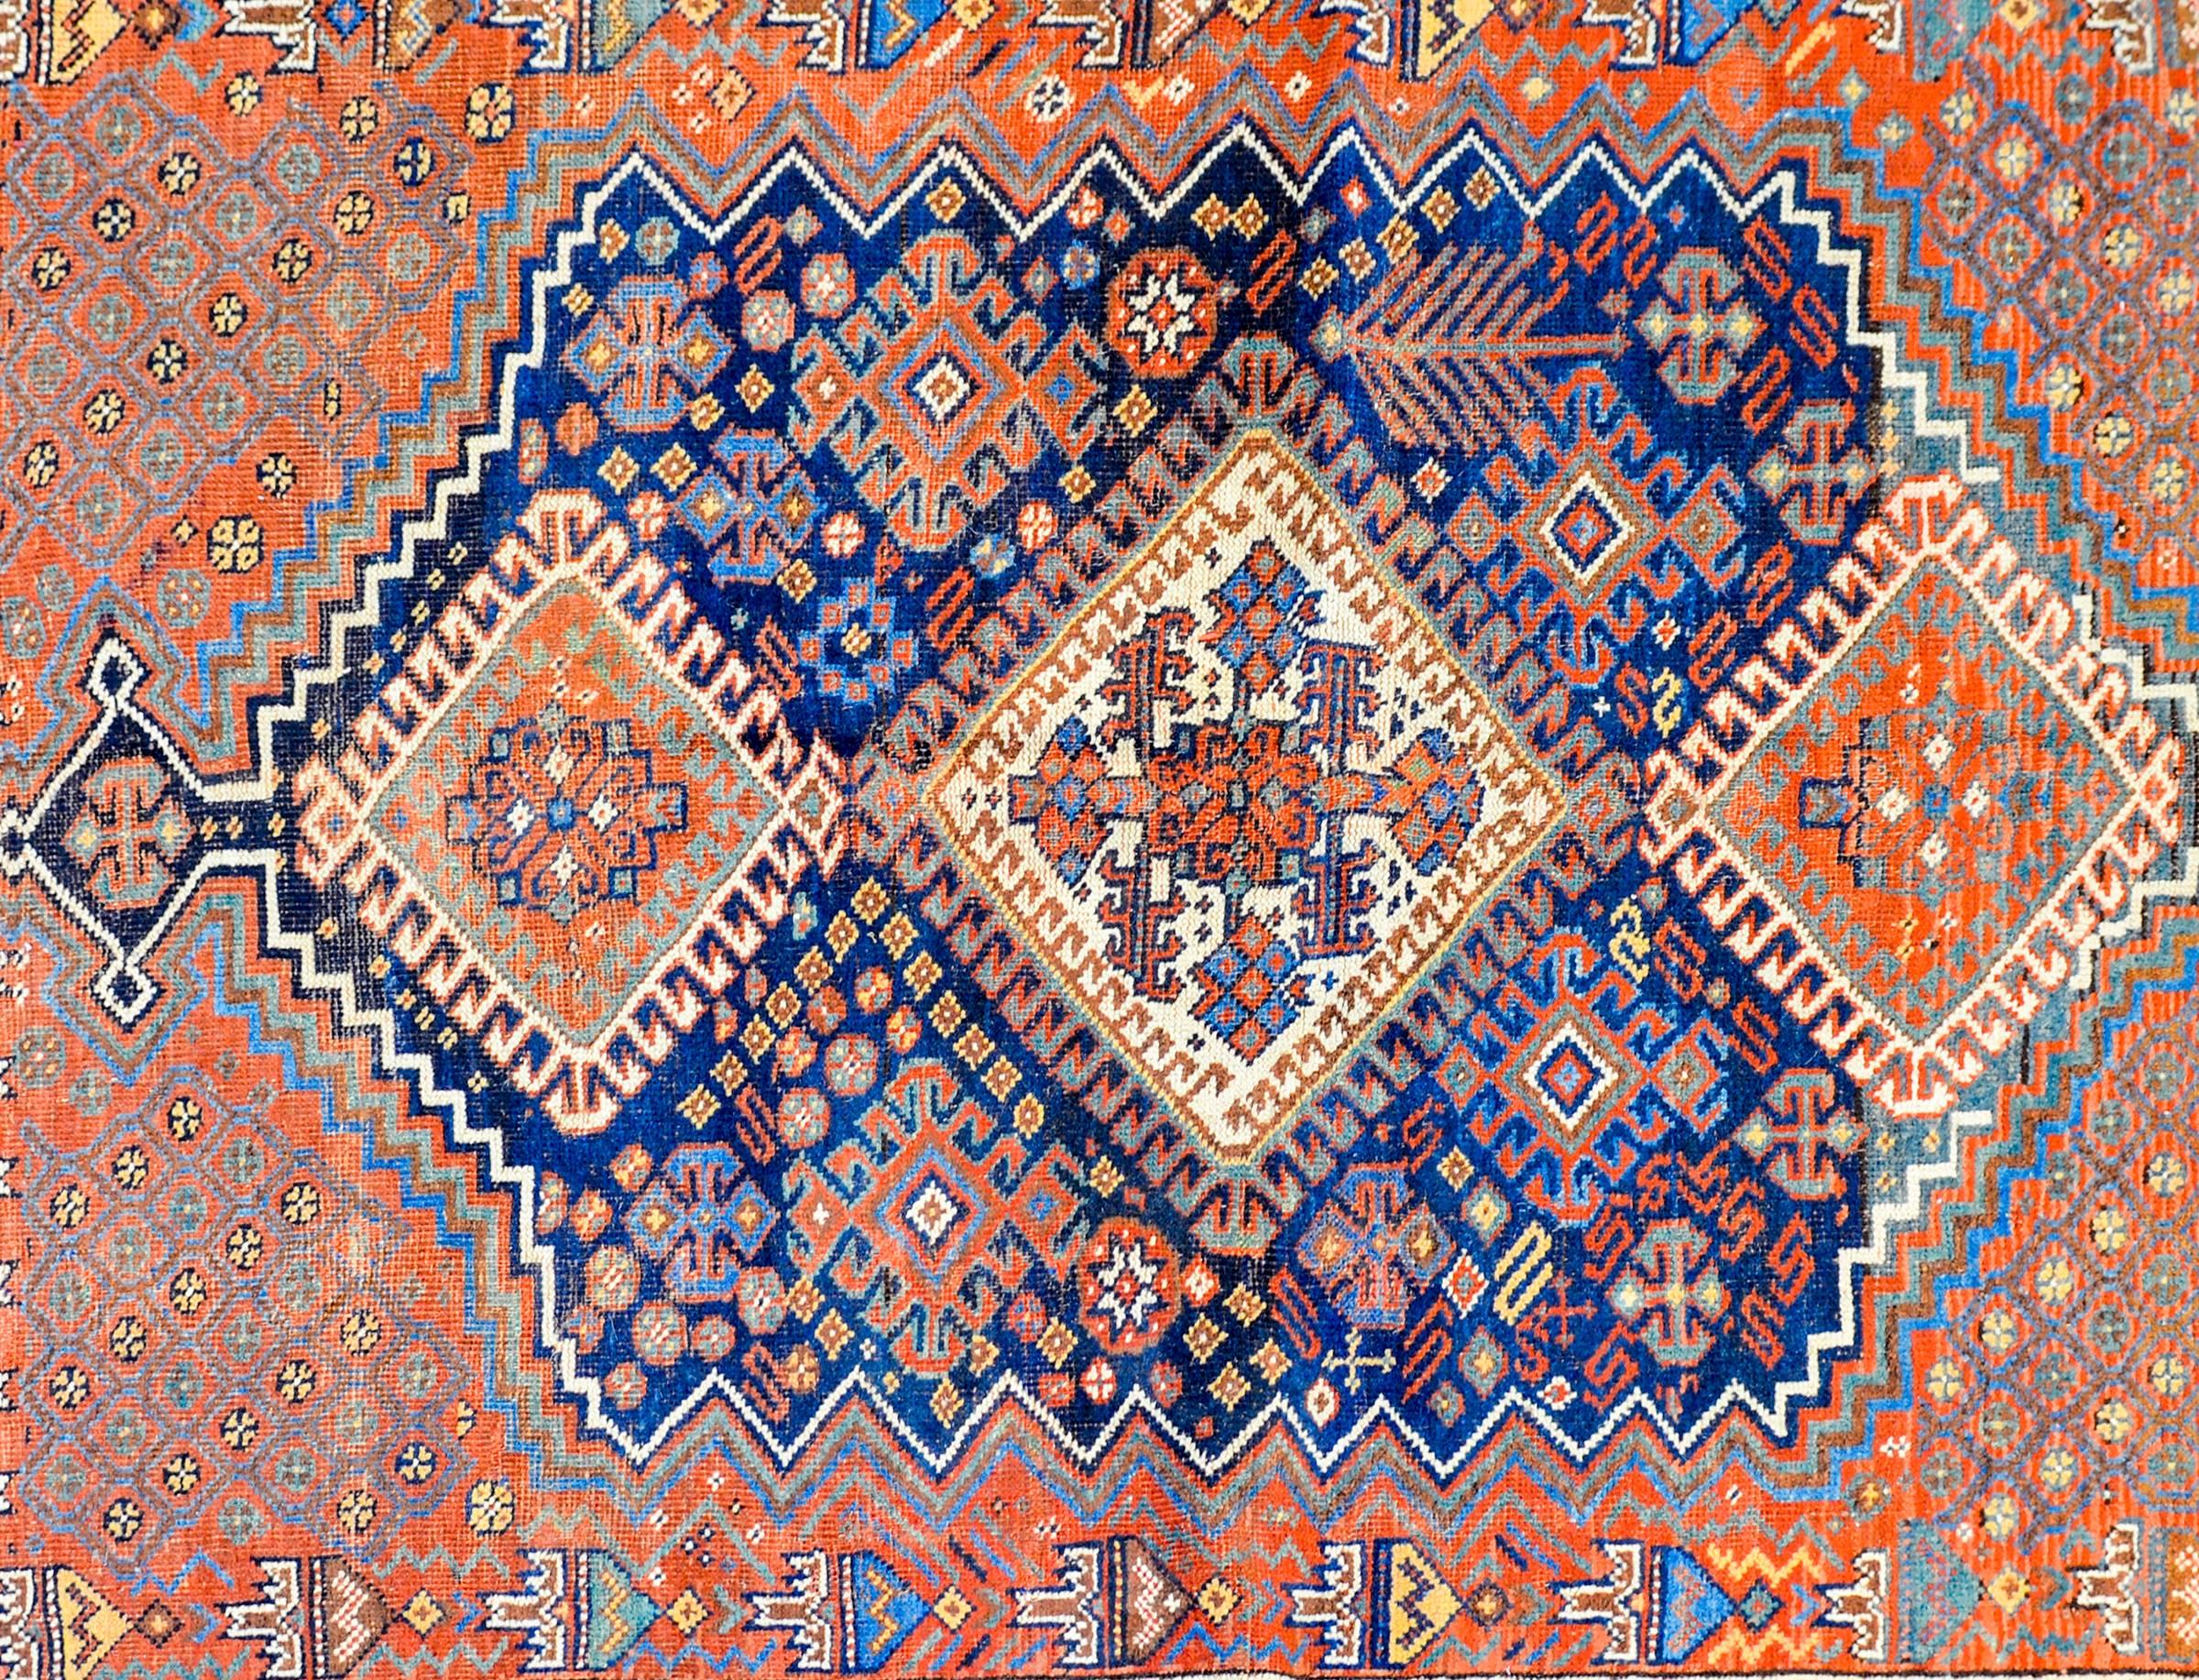 An incredible early 20th century Persian Ghashghaei rug with three large multicolored diamond medallions amidst a fantastic field of stylized flowers and bushes, trees-of-life all on a dark indigo background. The border is masterfully rendered, with